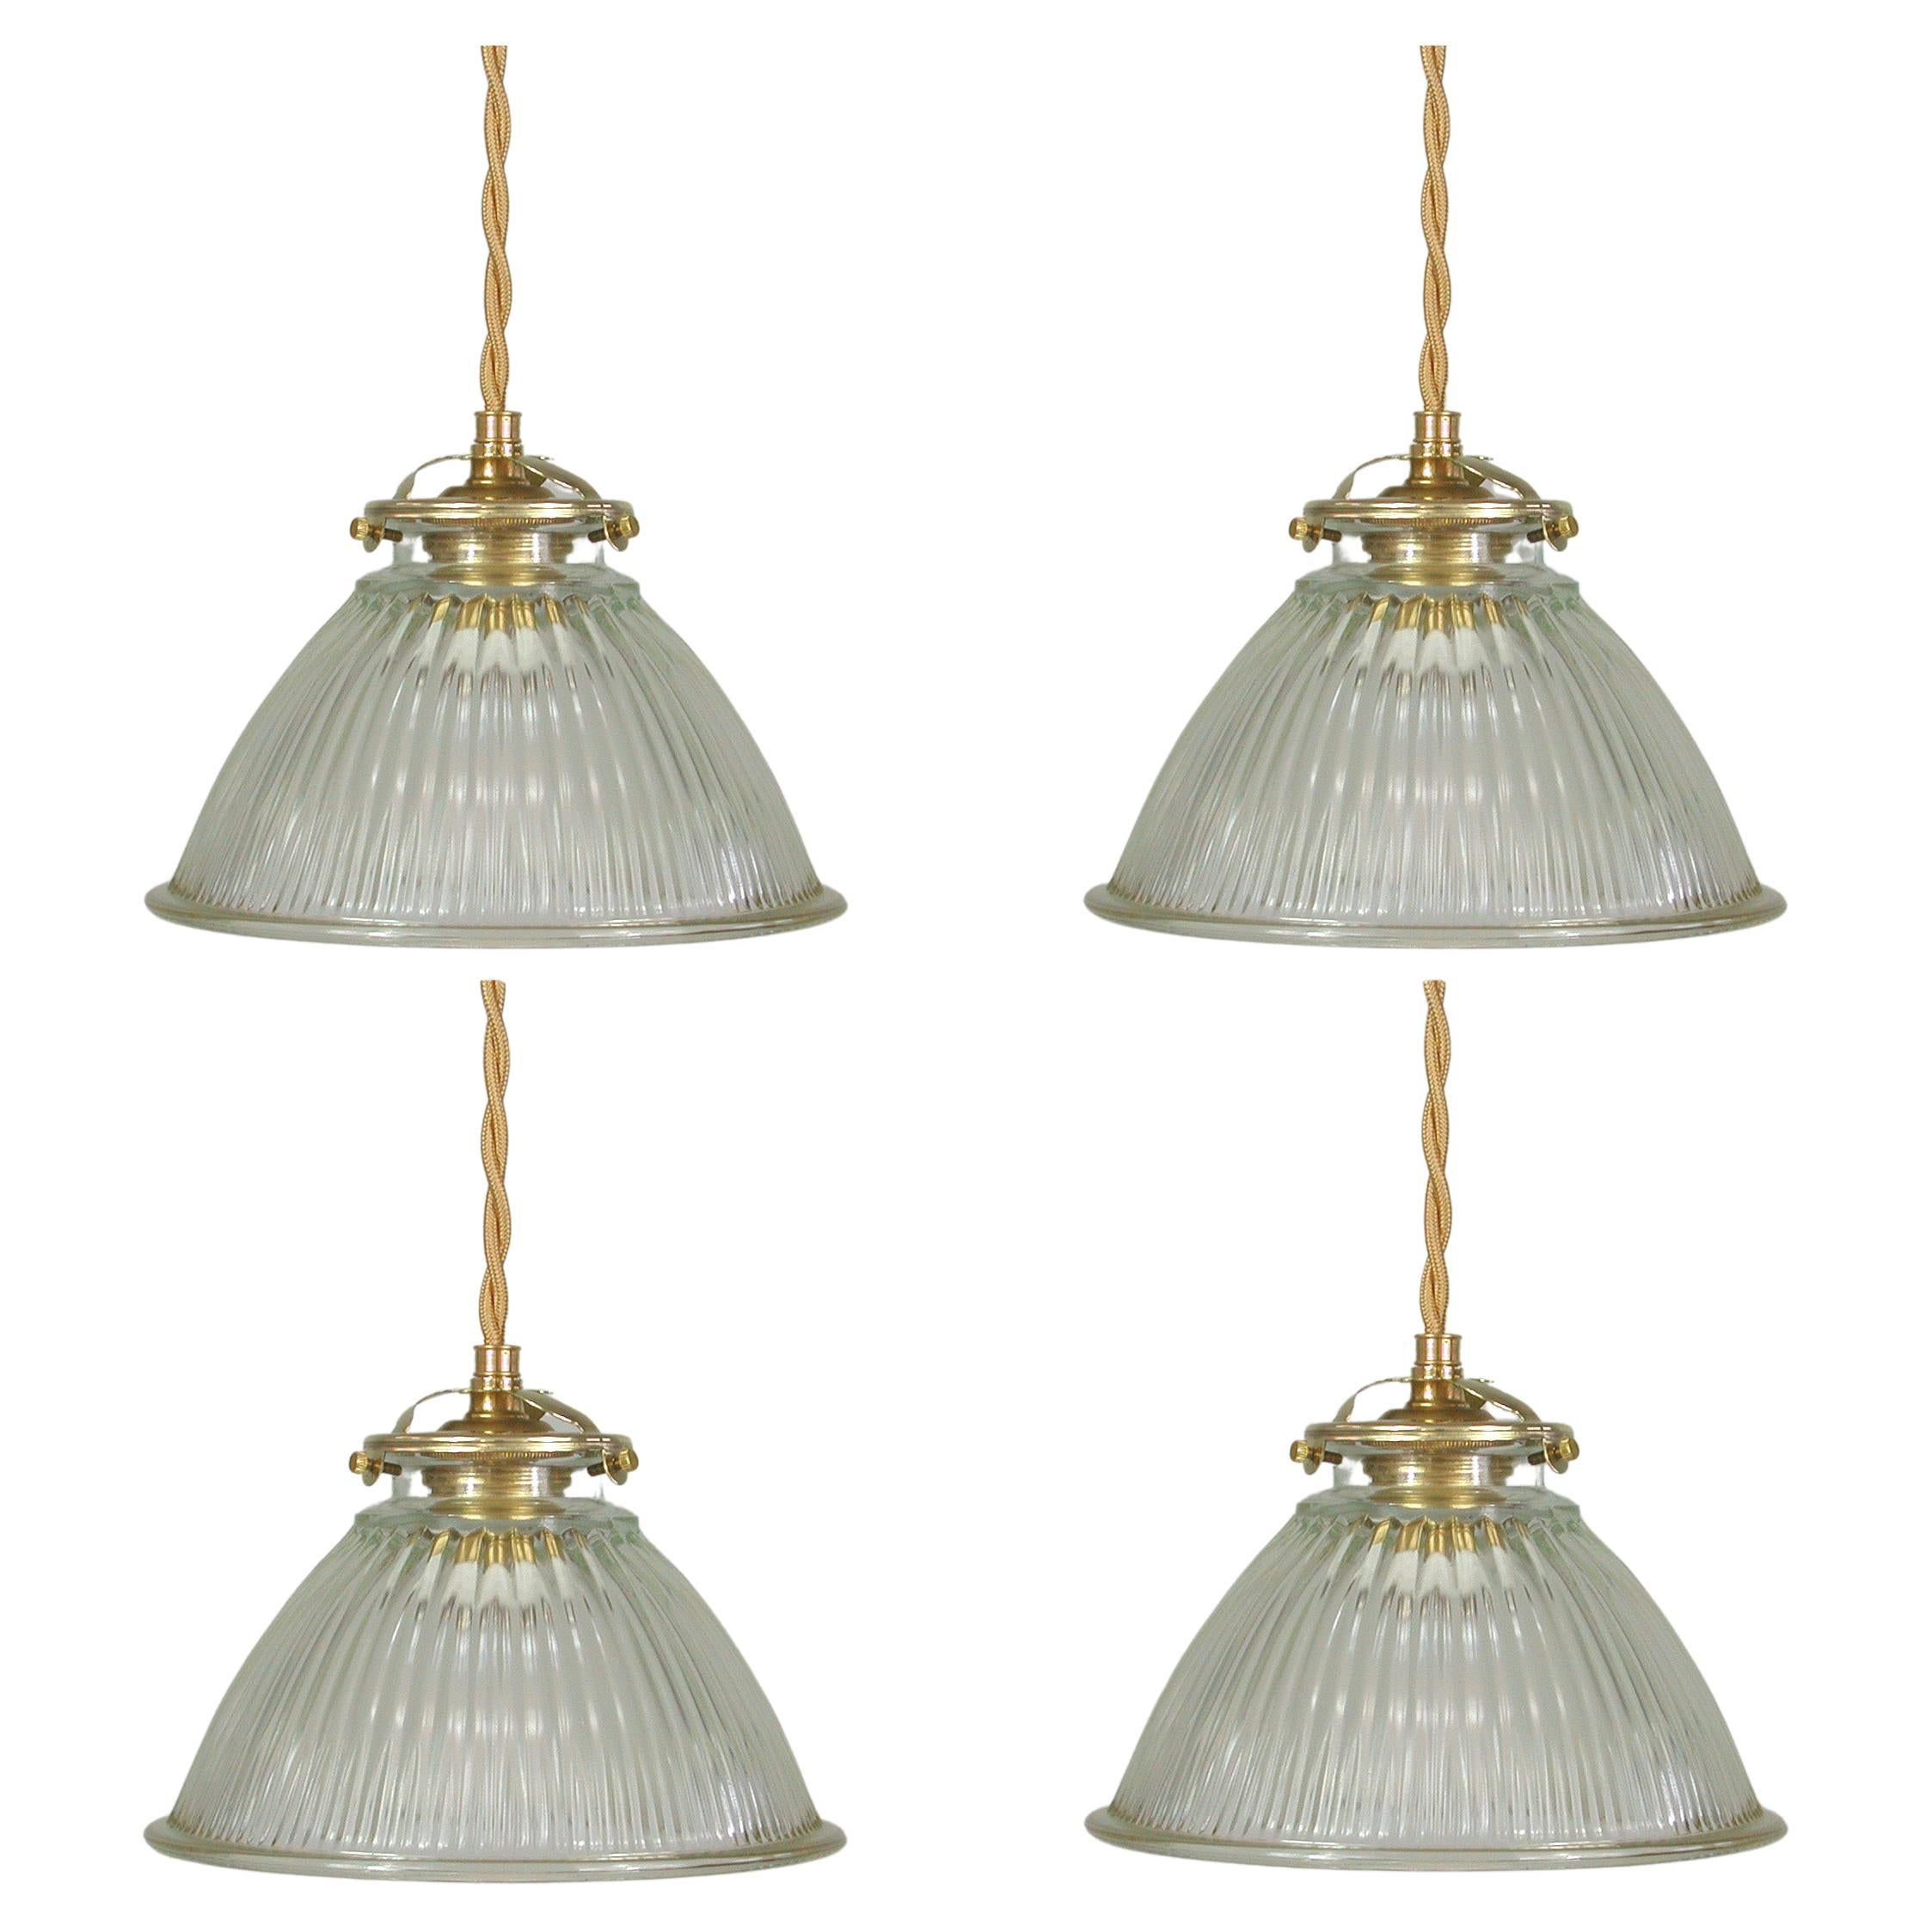 French Late Art Deco Holophane Industrial Glass Pendant Light, 1930s to 1940s